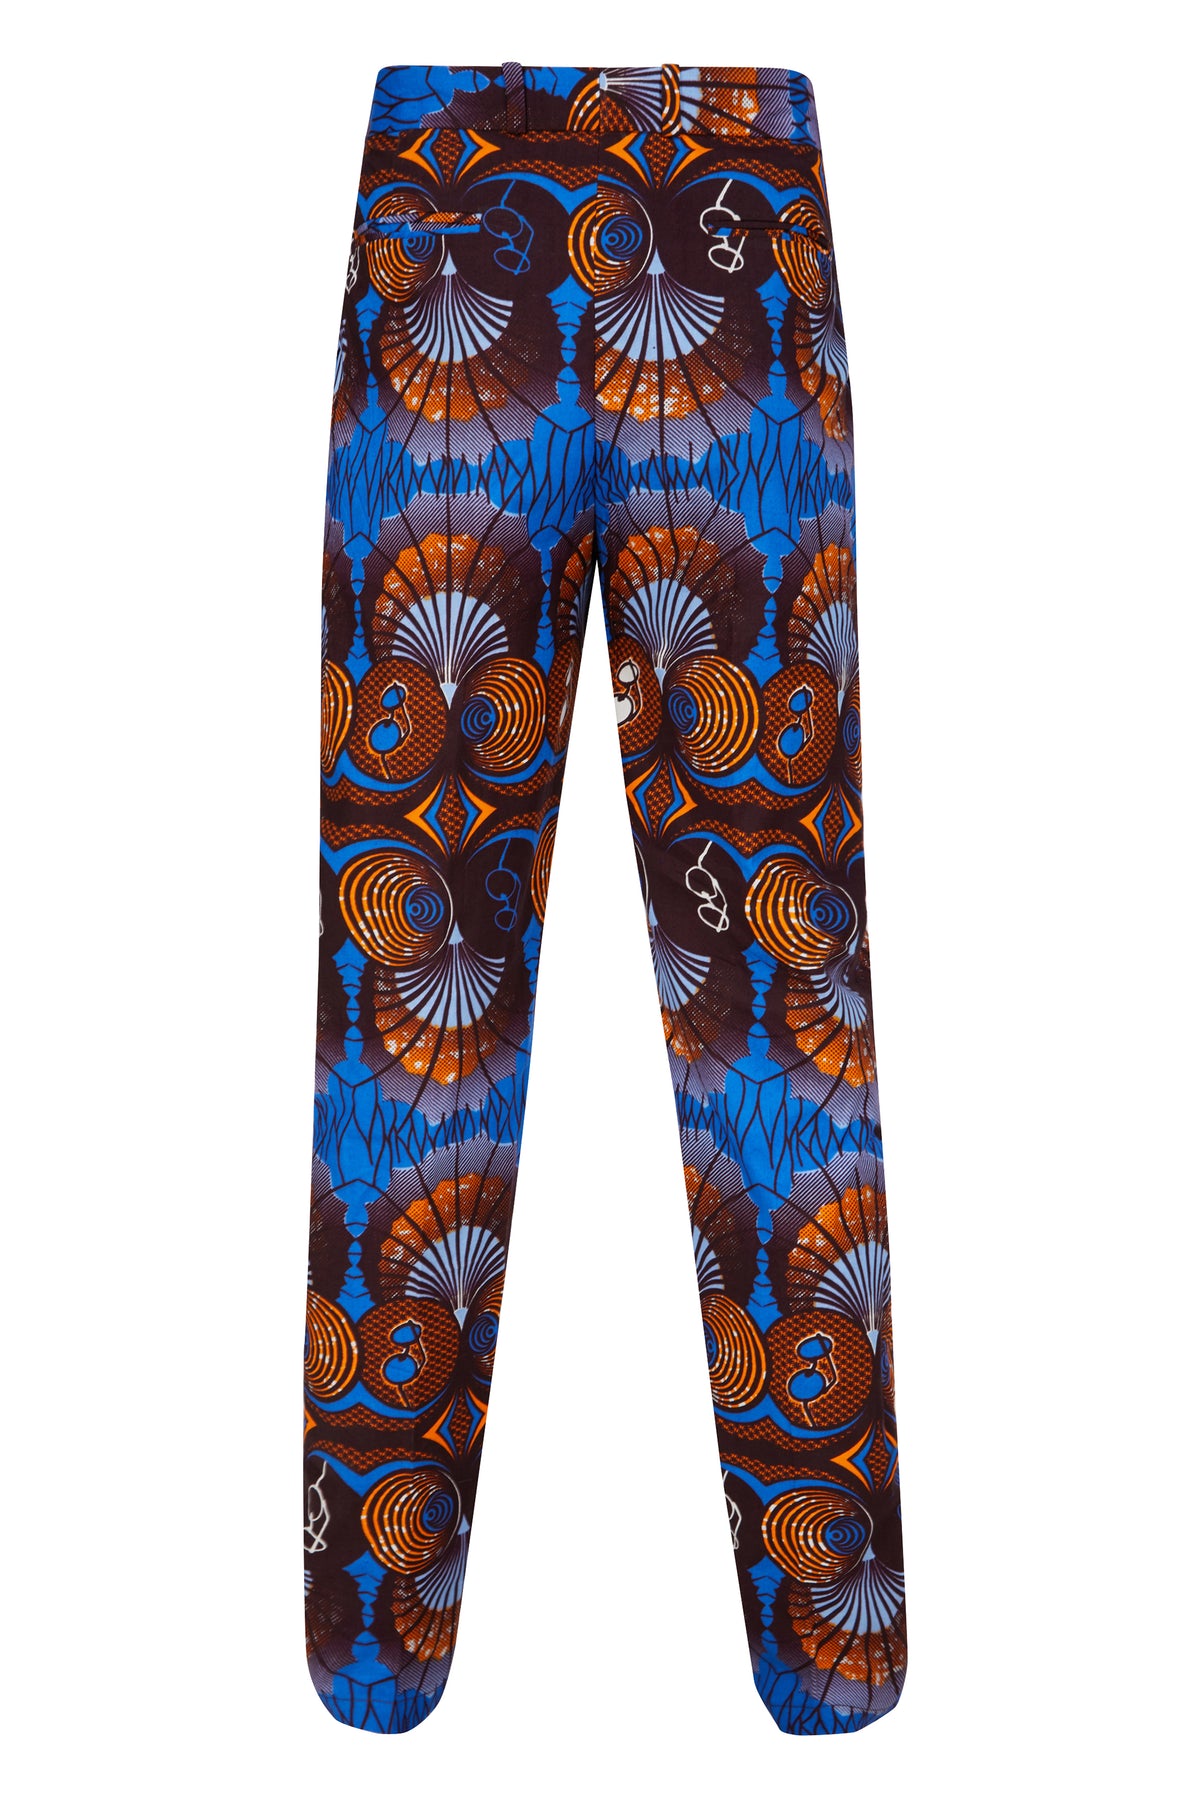 Karl relaxed fit trousers- Specs - OHEMA OHENE AFRICAN INSPIRED FASHION